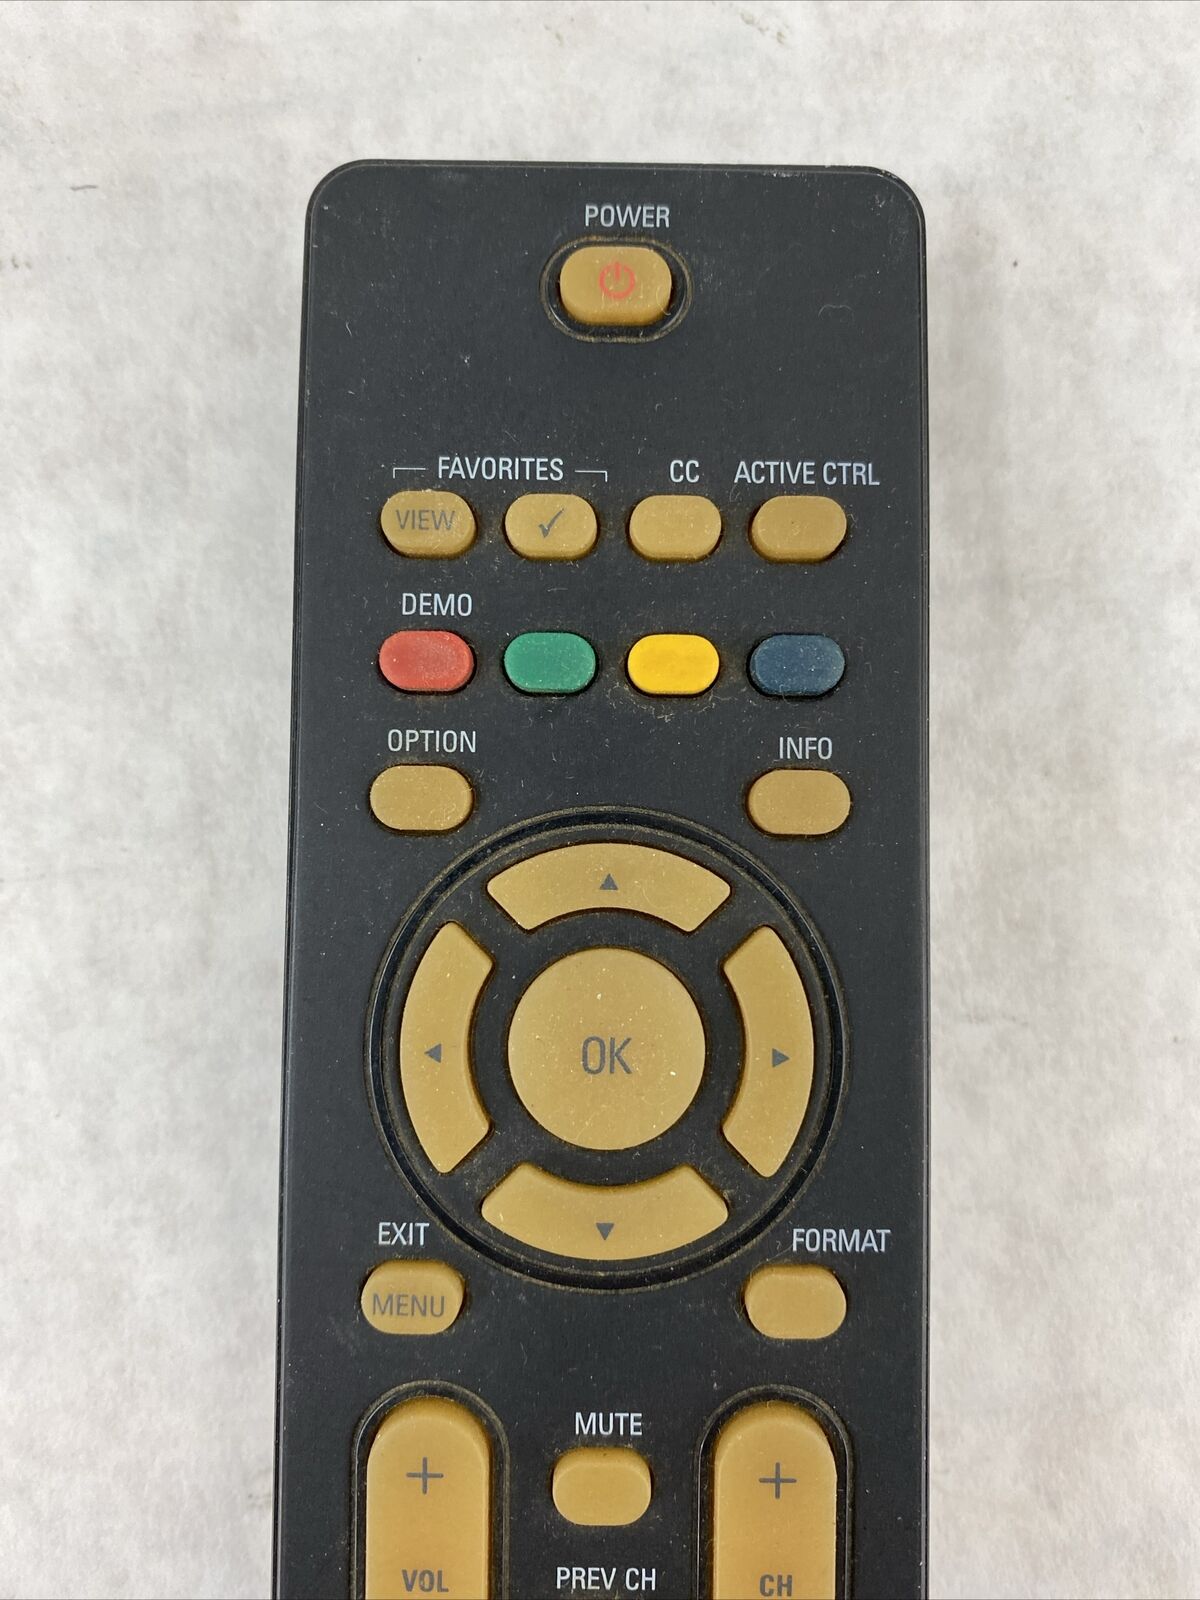 Philips RC2033601/01 TV Remote Control 3139 238 14171 CP05 TESTED Genuine OEM